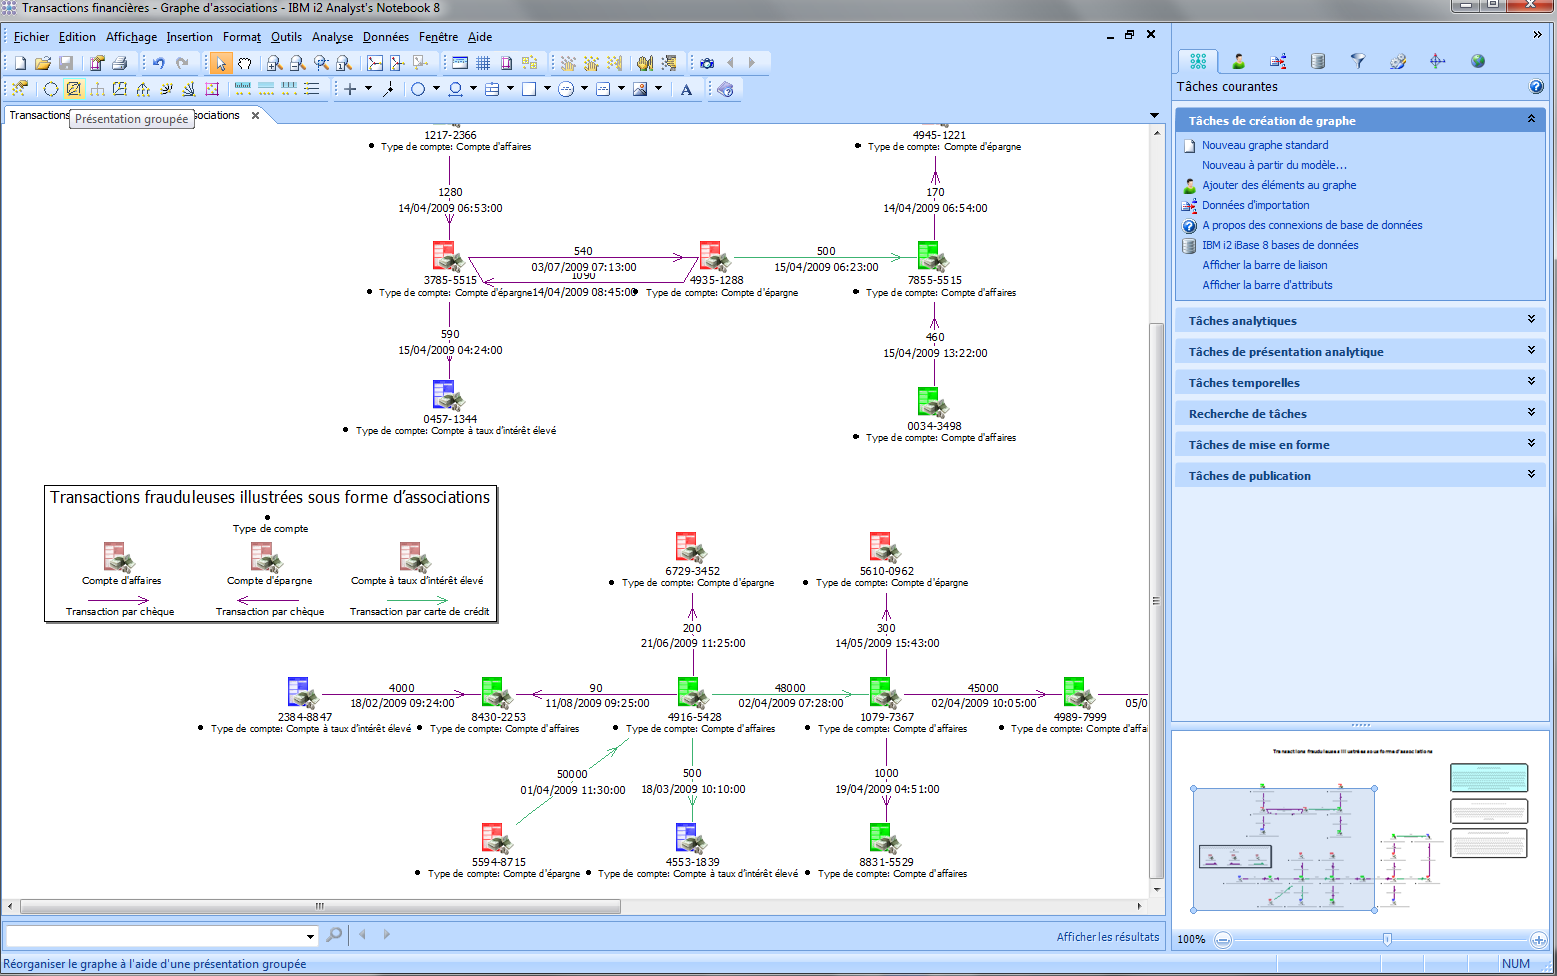 Example of  Financial Transactions Analysis using IBM i2 Analyst's Notebook